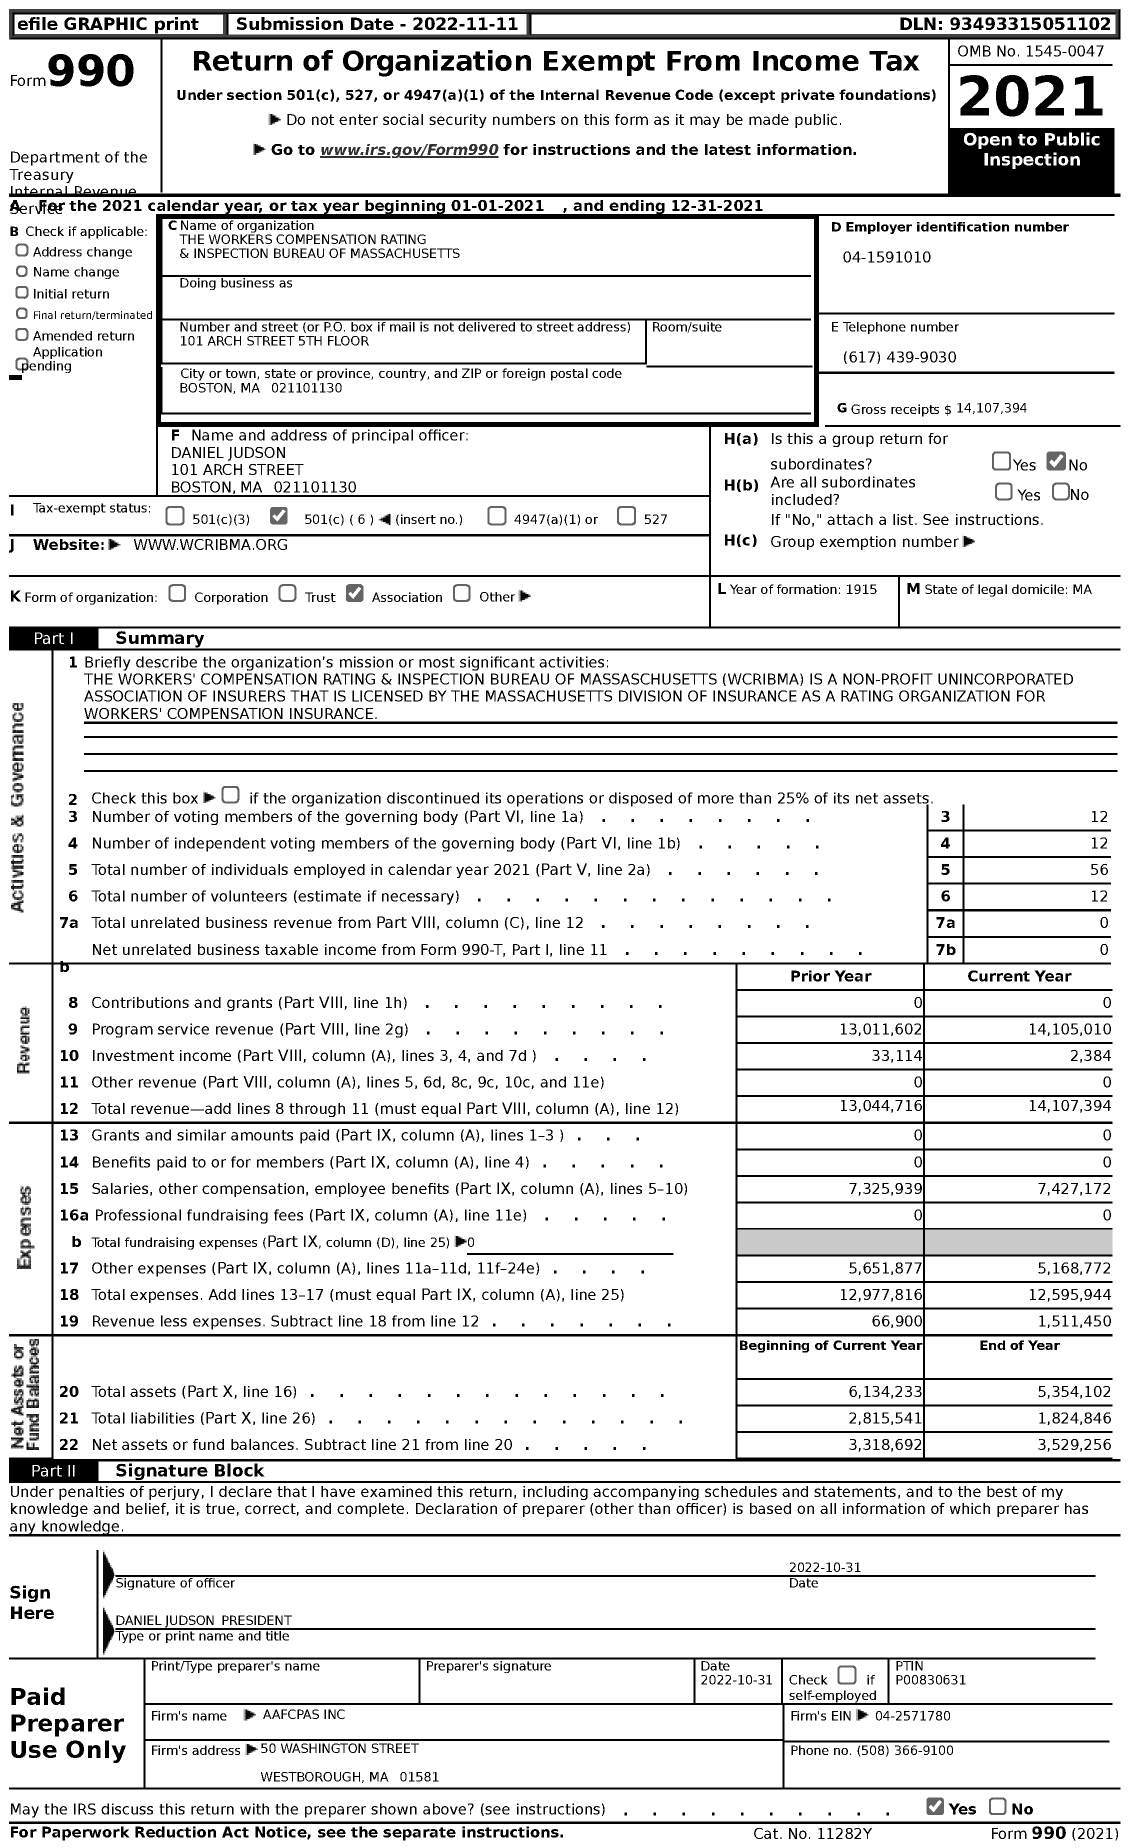 Image of first page of 2021 Form 990 for The Workers Compensation Rating and Inspection Bureau of Massachusetts